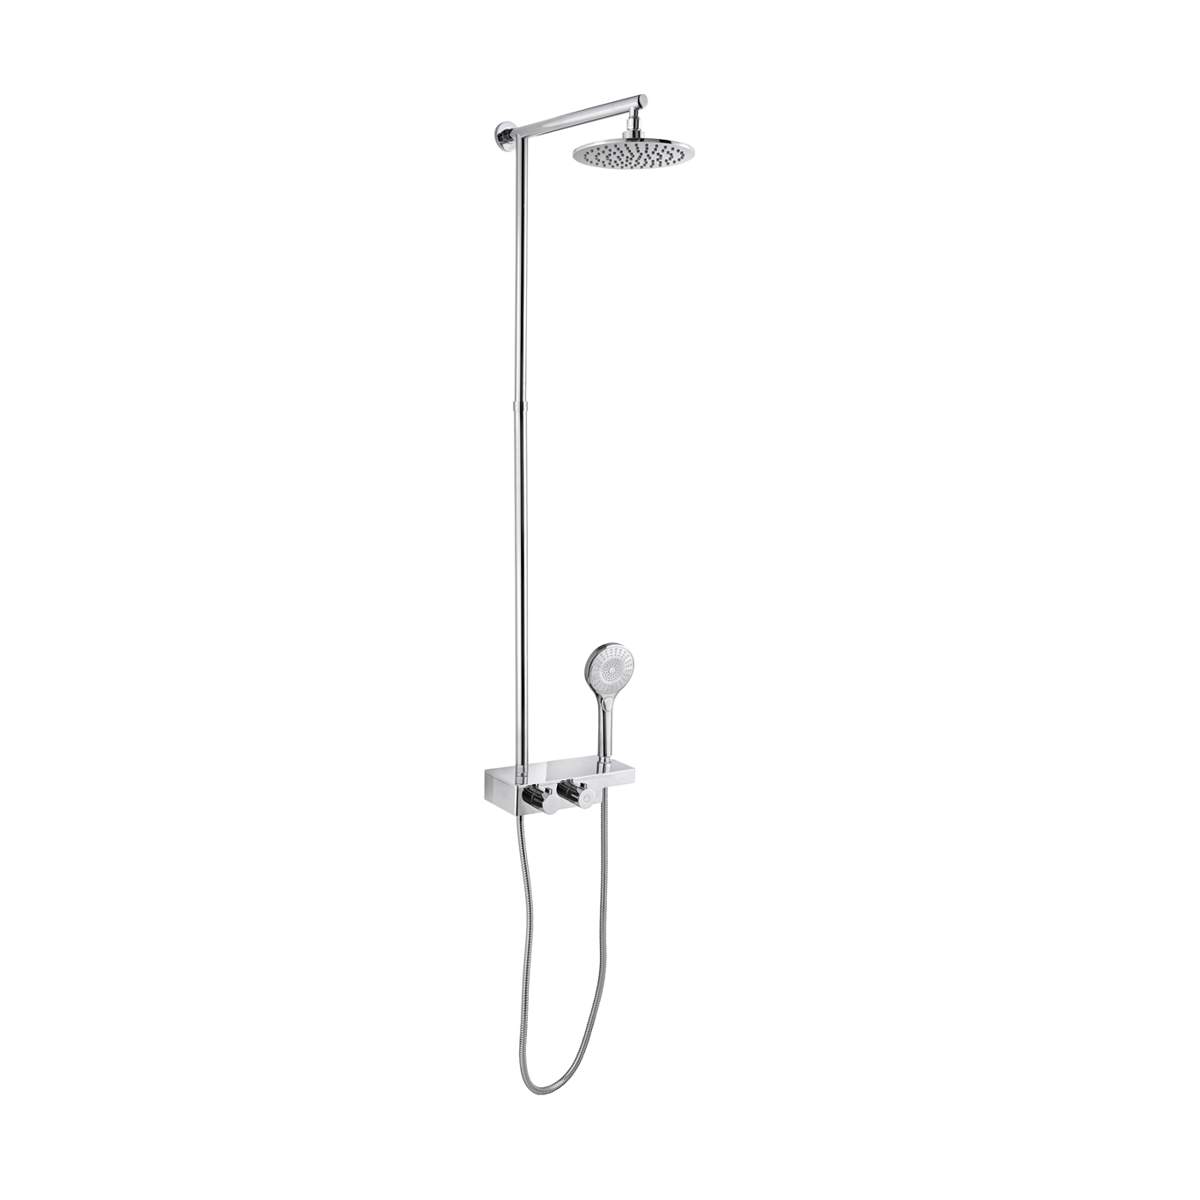 JTP Rail with Overhead and Multifunction Hand Shower (ED189)